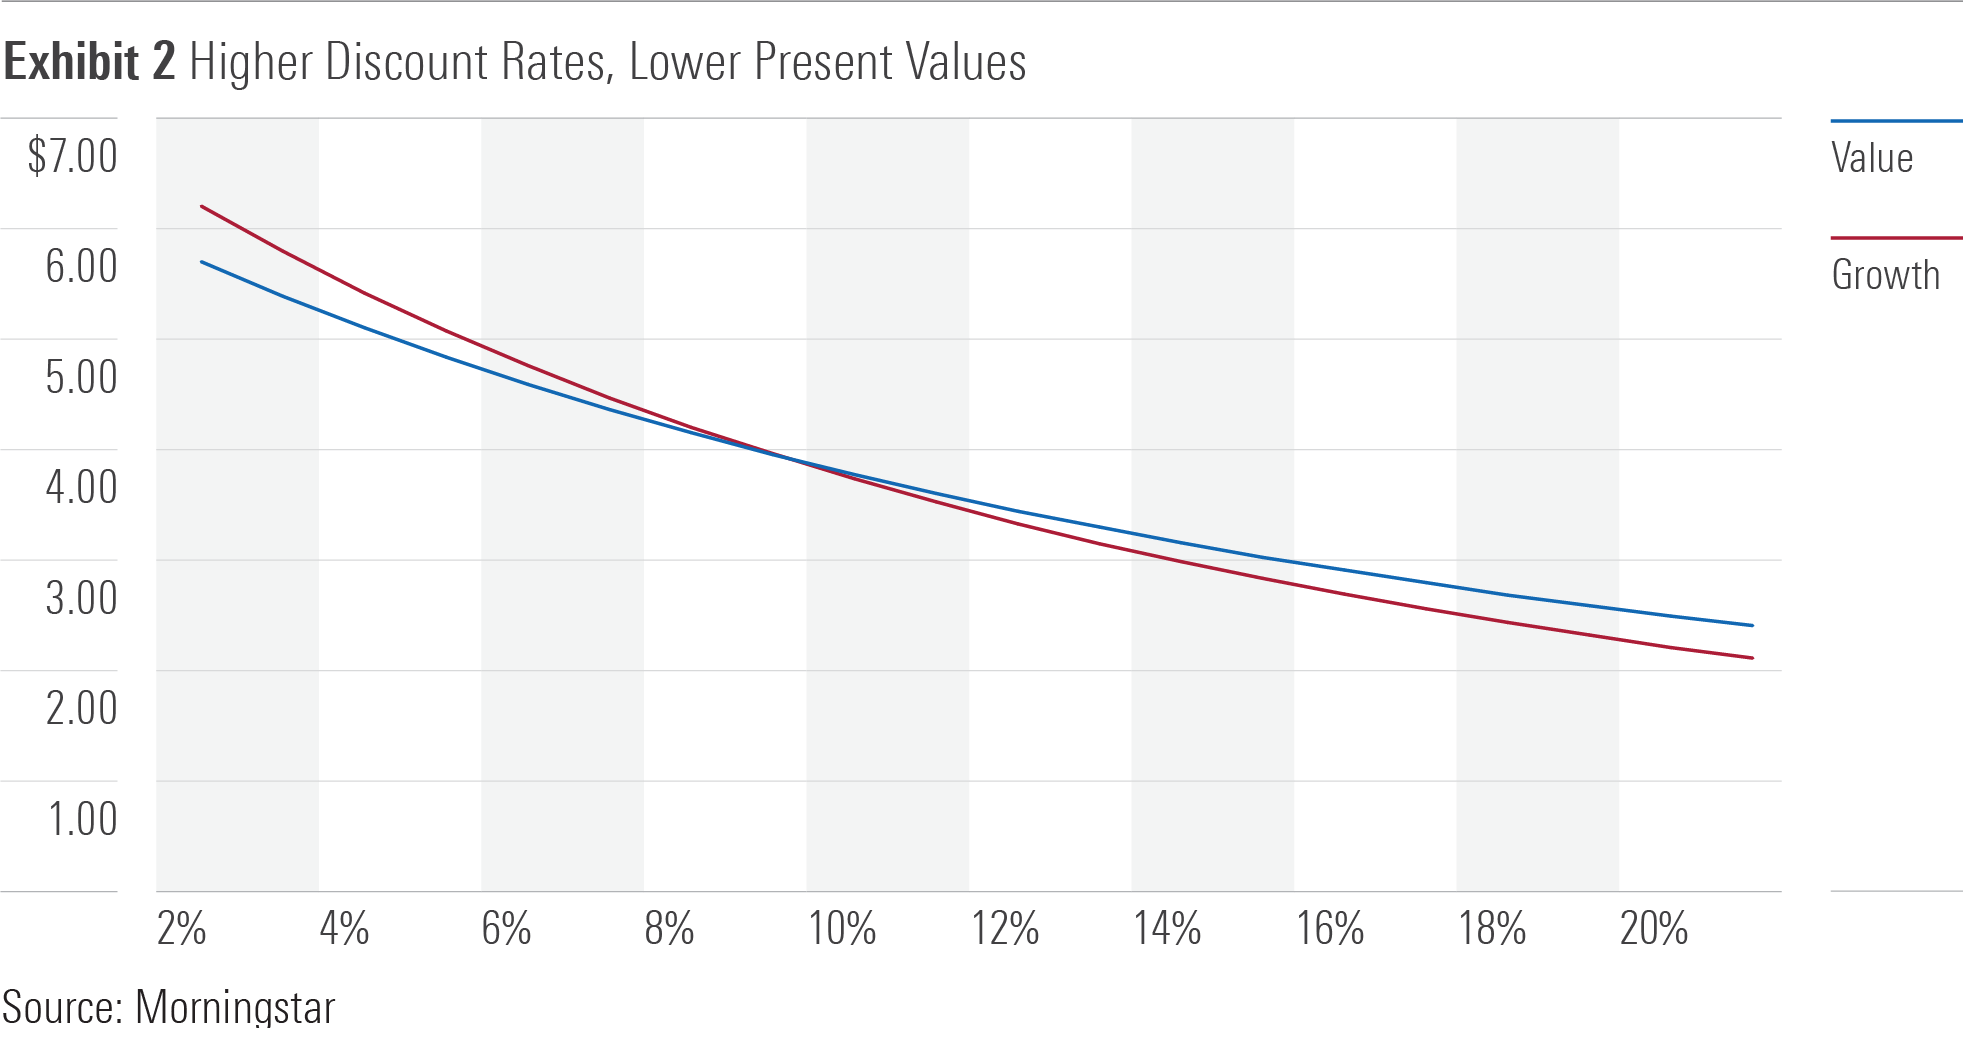 A line chart depicting the relationship between discount rates and values for growth and value stocks.